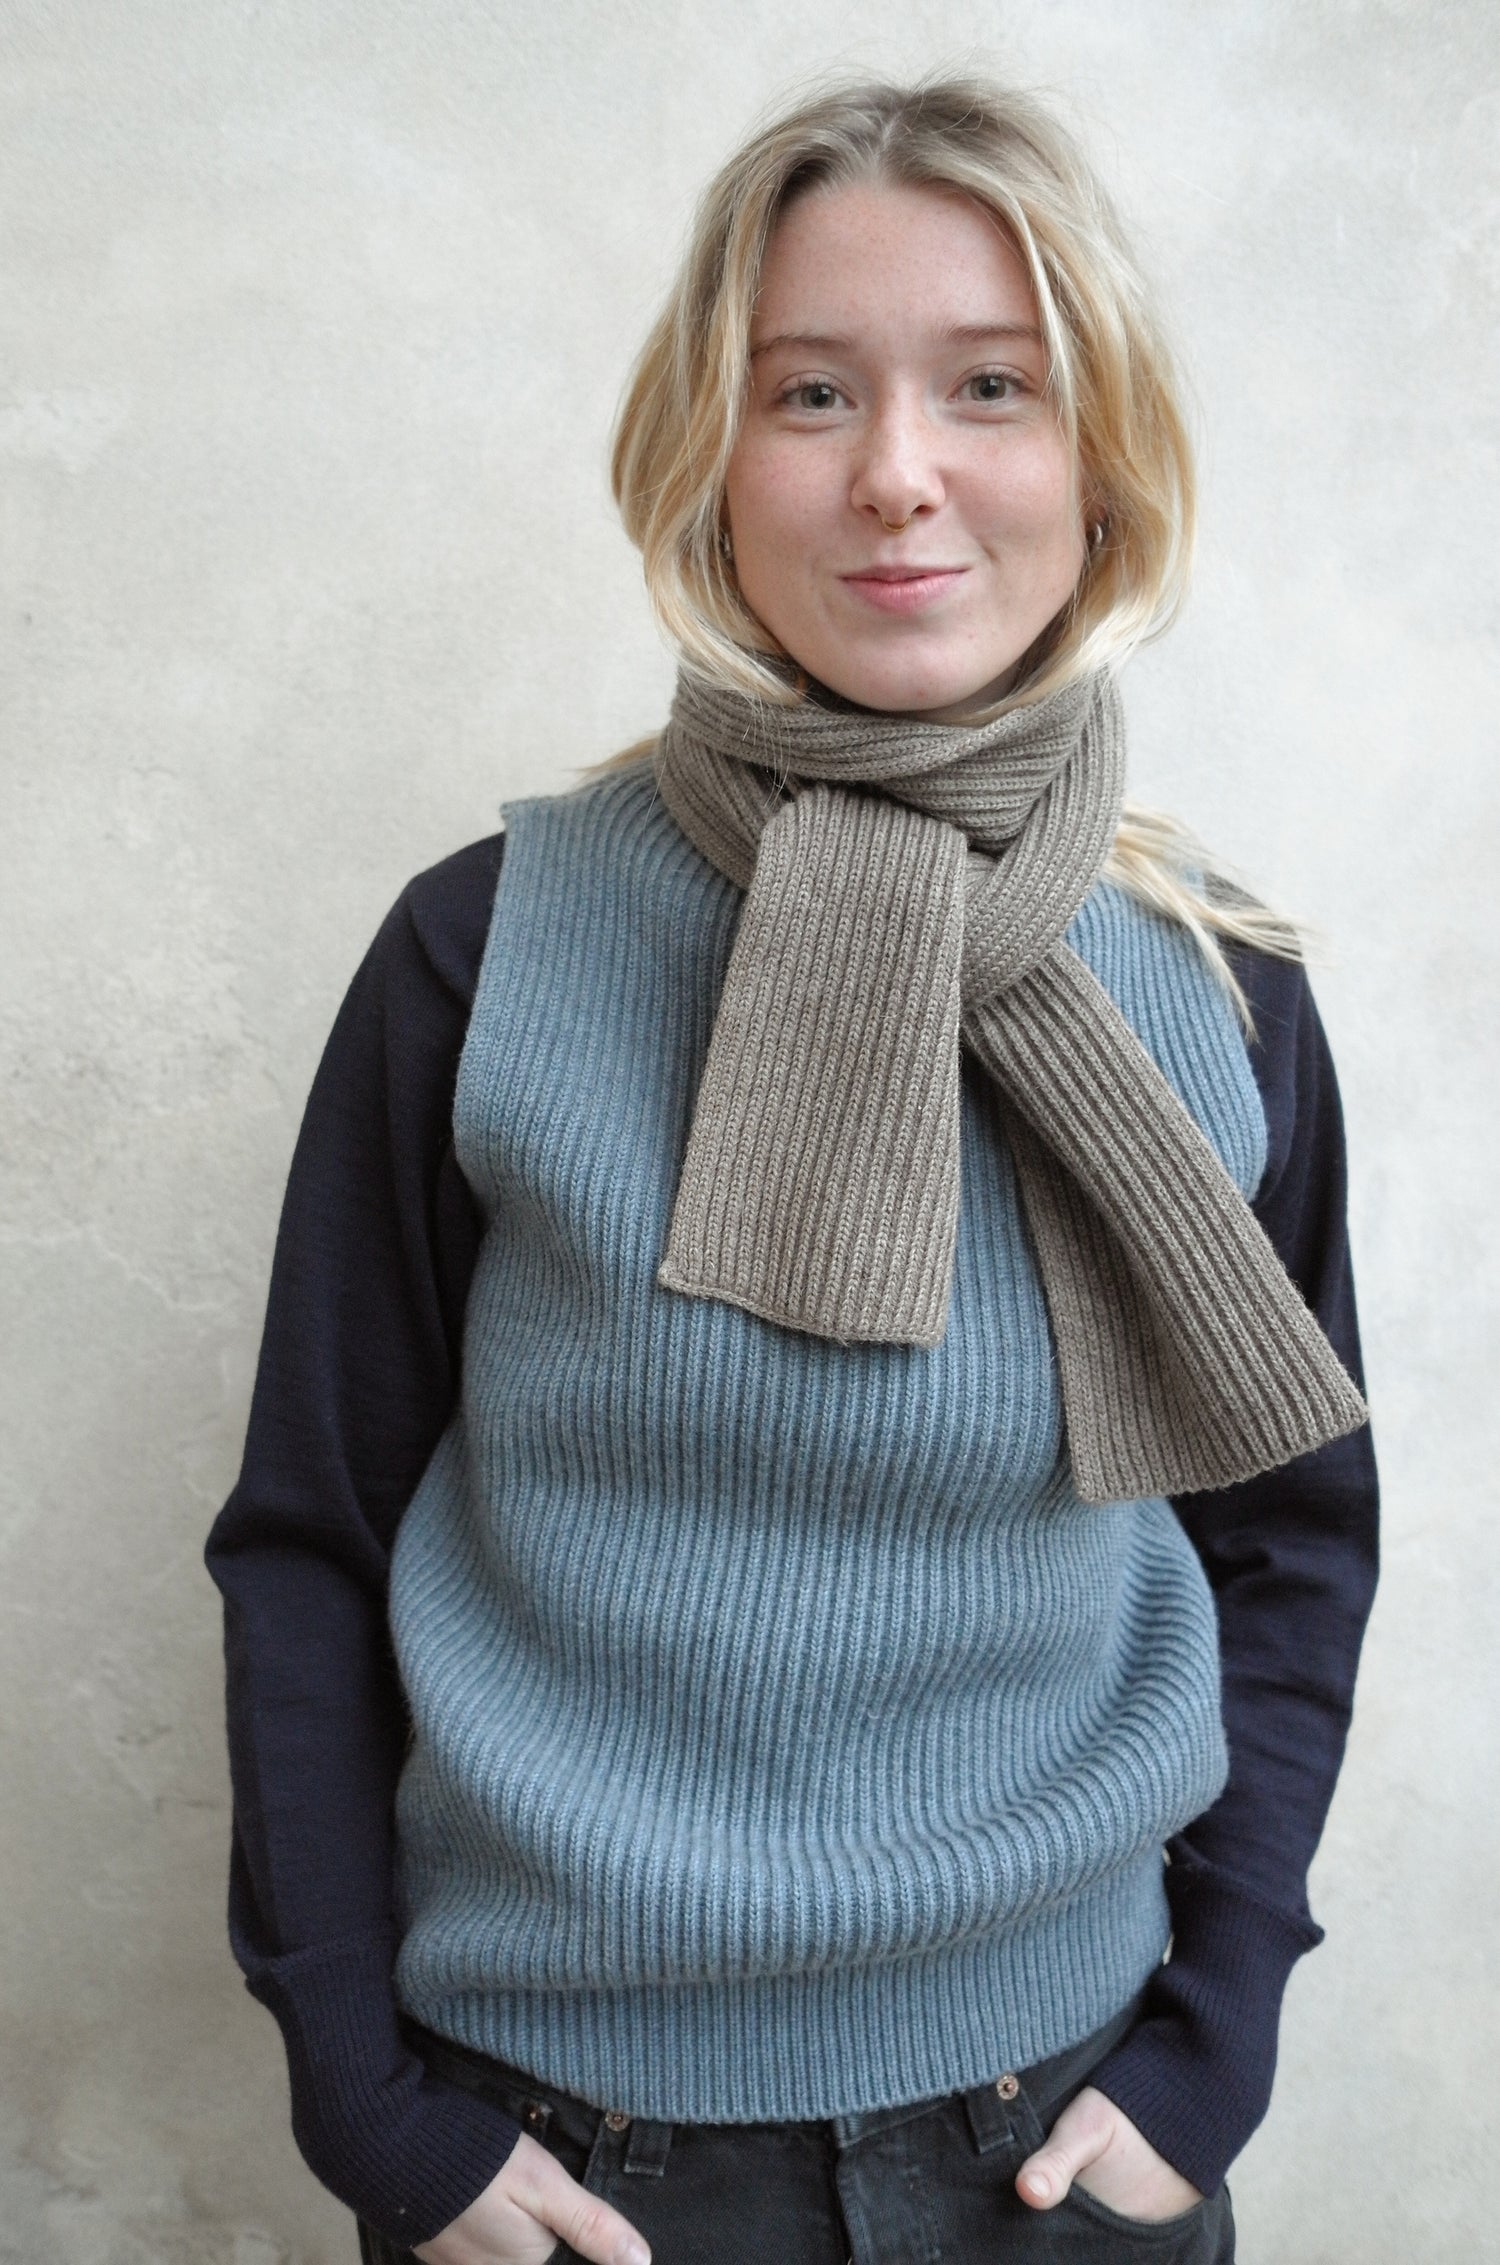 Rosa wearing Short Scarf and Navy Vest